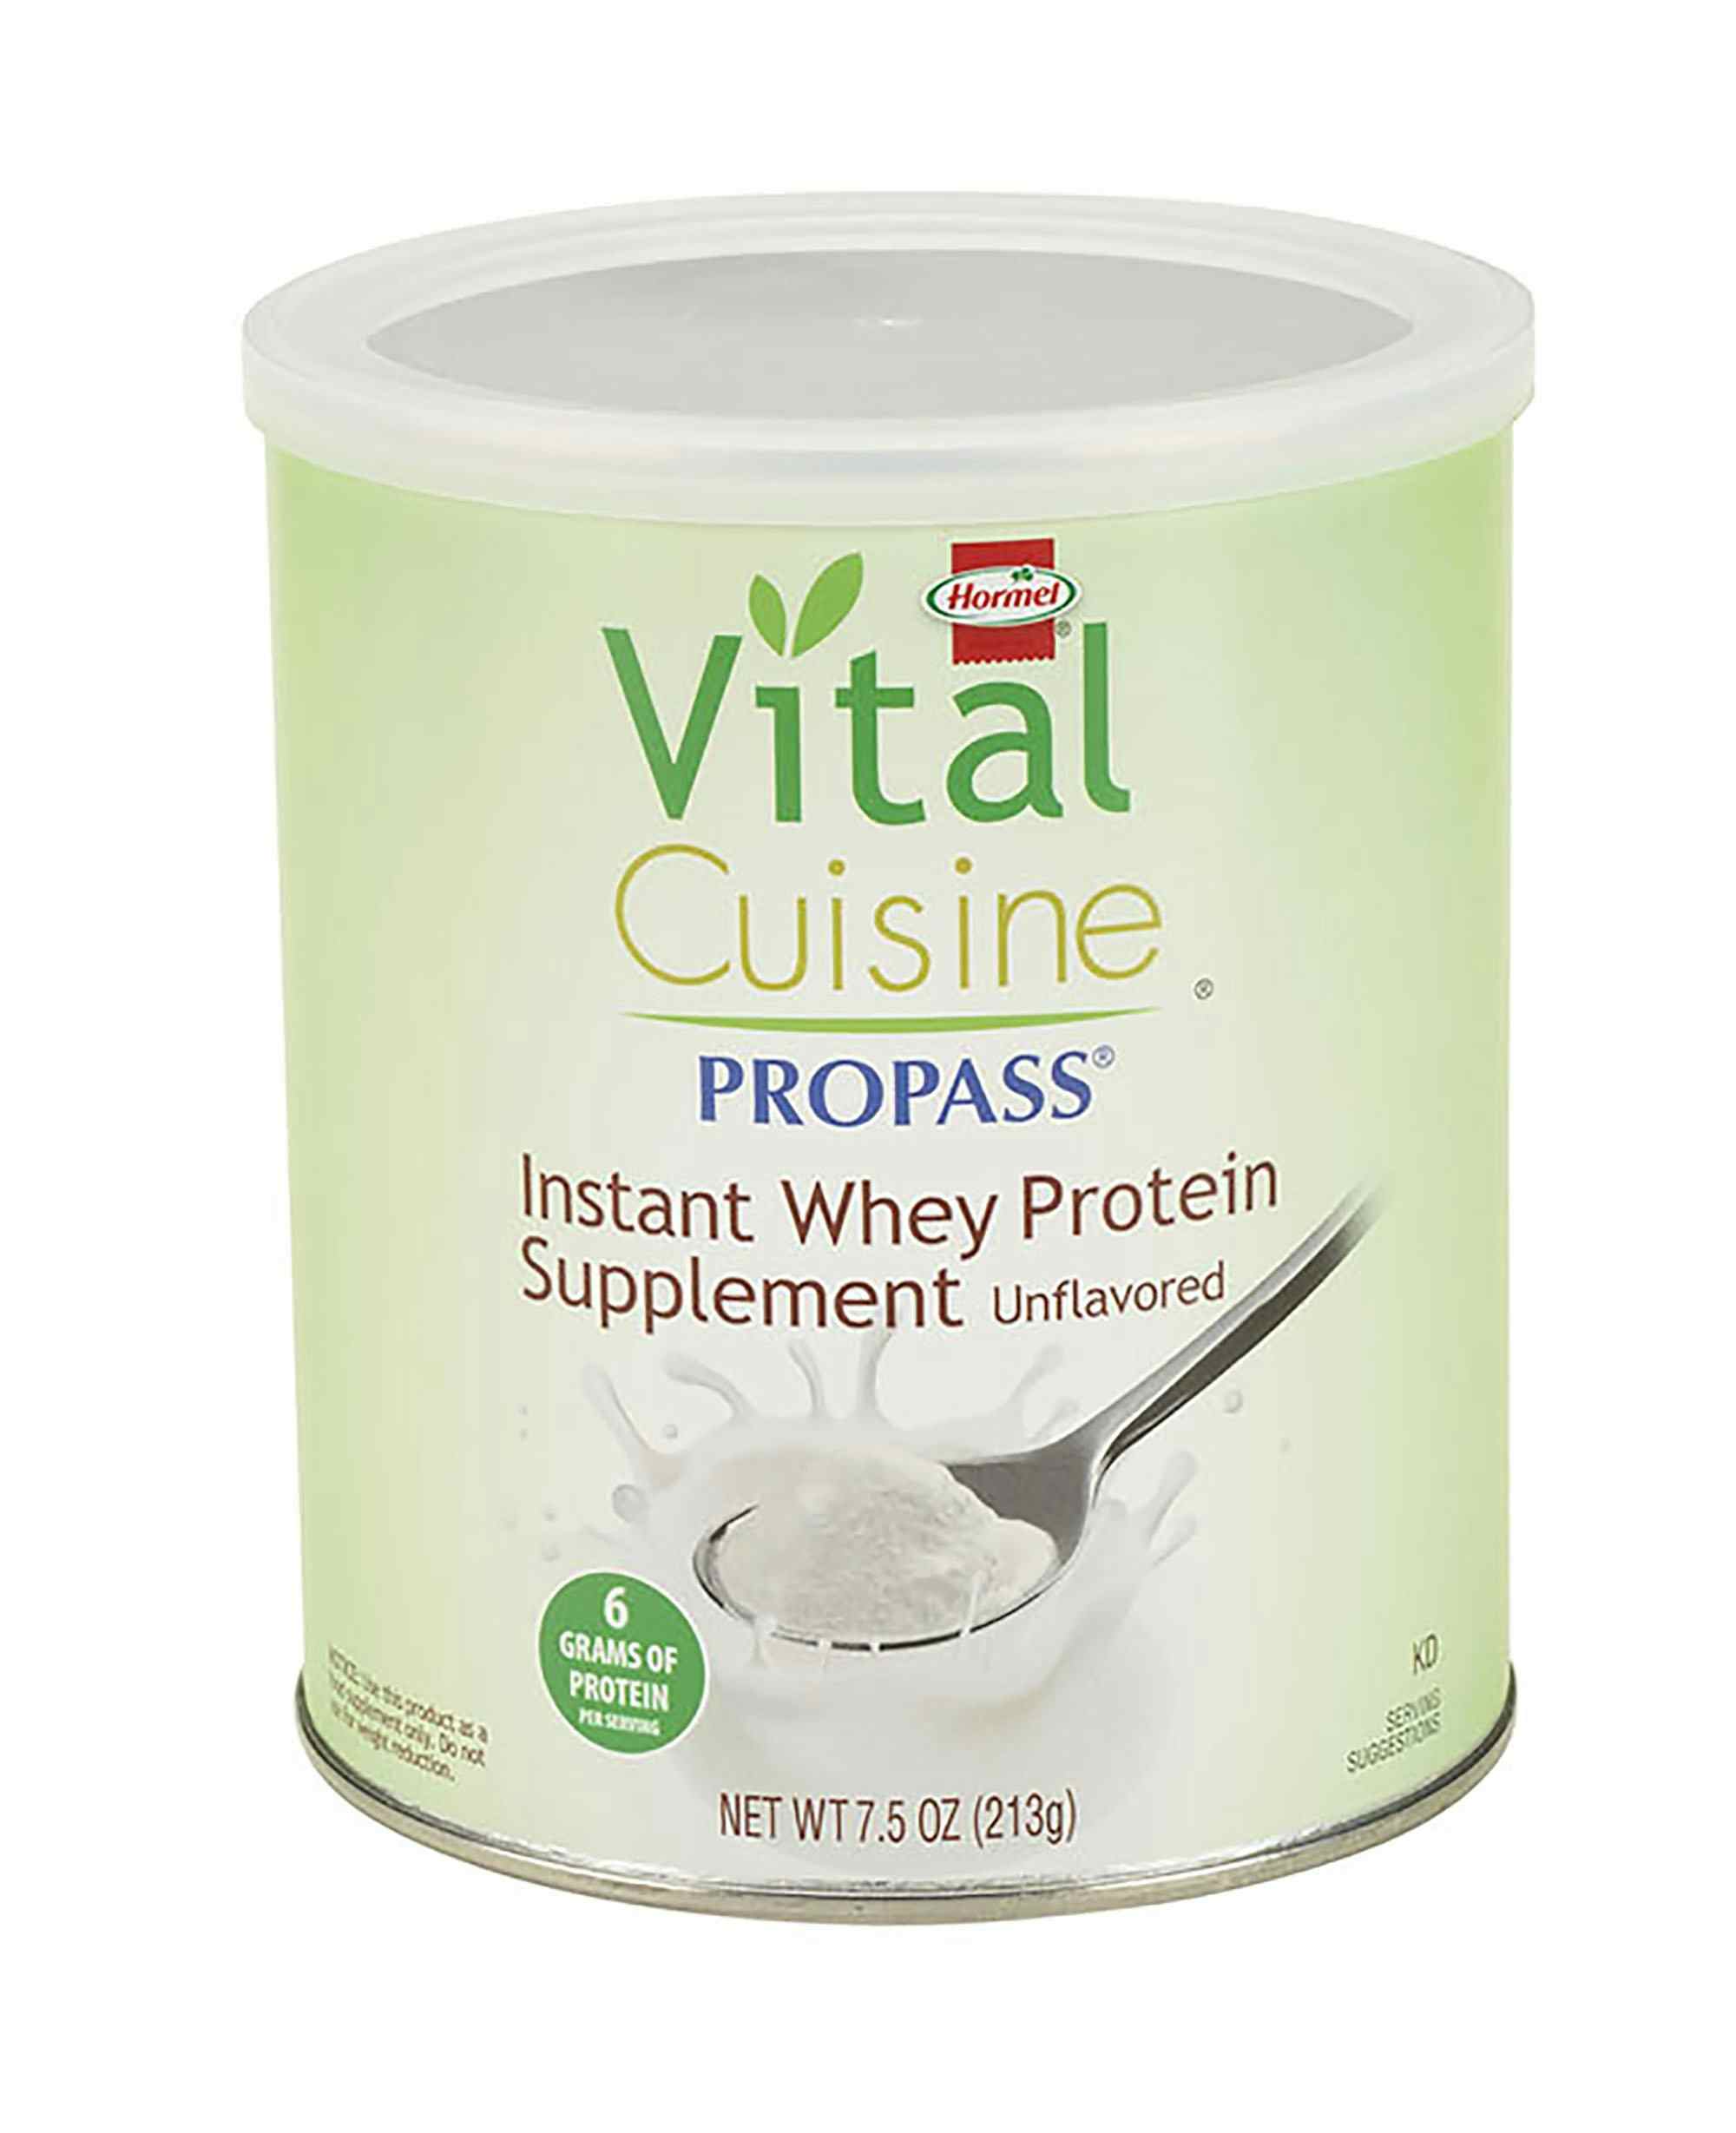  Vital Cuisine ProPass Oral Protein Supplement Whey Protein, Unflavored Powder, 7.5 oz., Can, 13126, Case of 4 Cans